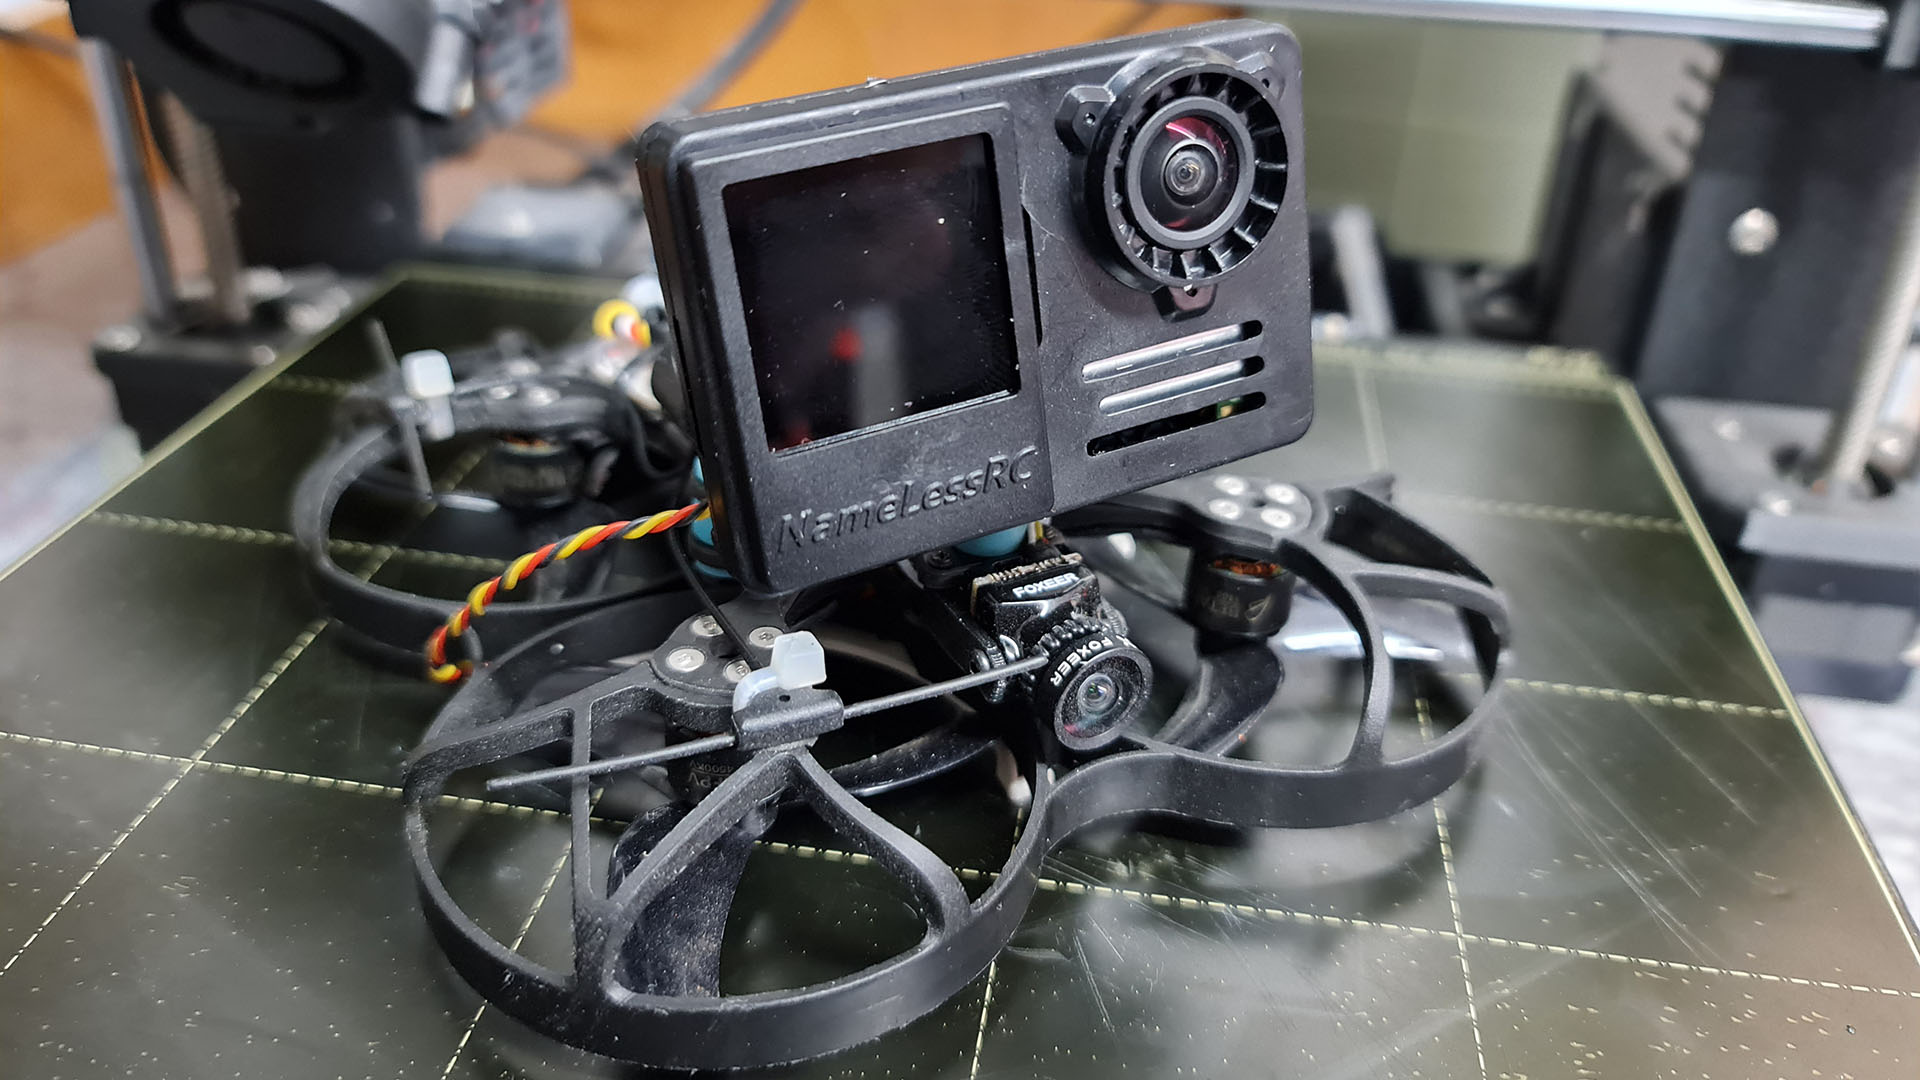 Gopro Cam Spy Nude - Naked GoPro 9 â€“ Decasing and Recasing | Twisted Artwork - Developement Blog